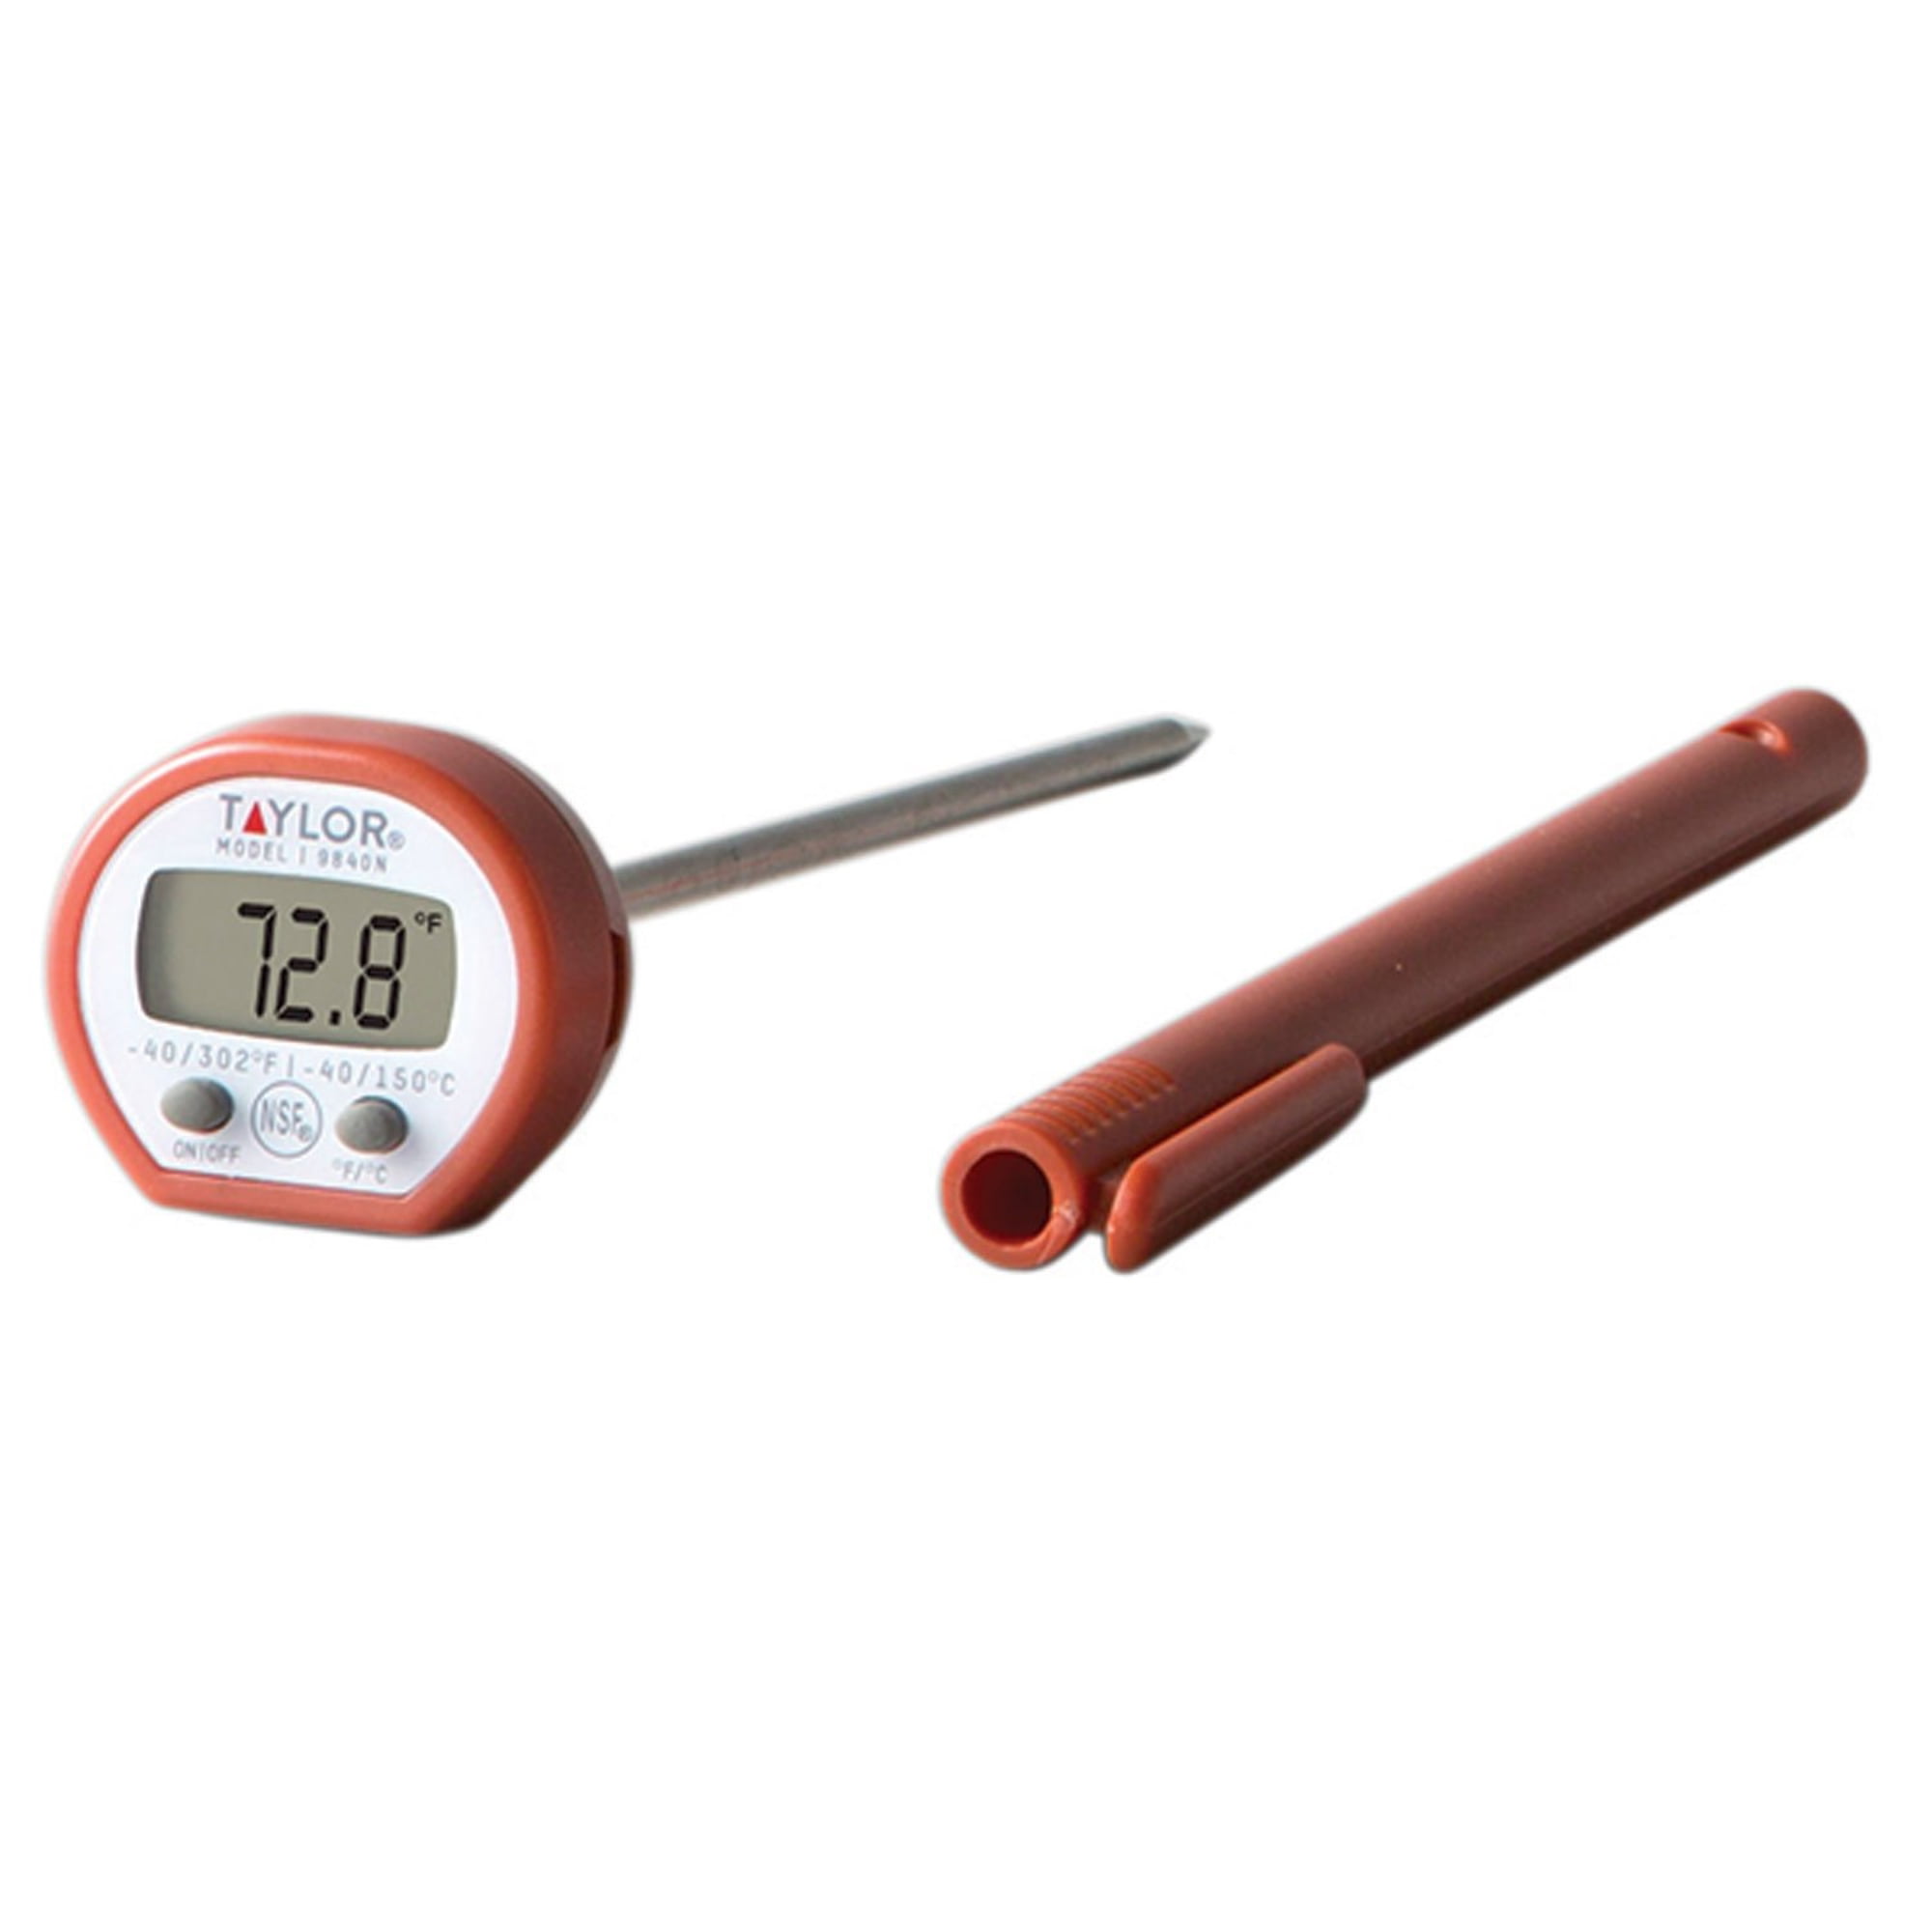 Taylor Precision Products 3512 Instant Pocket Thermometer 0-220 Deg F 1 in Red 